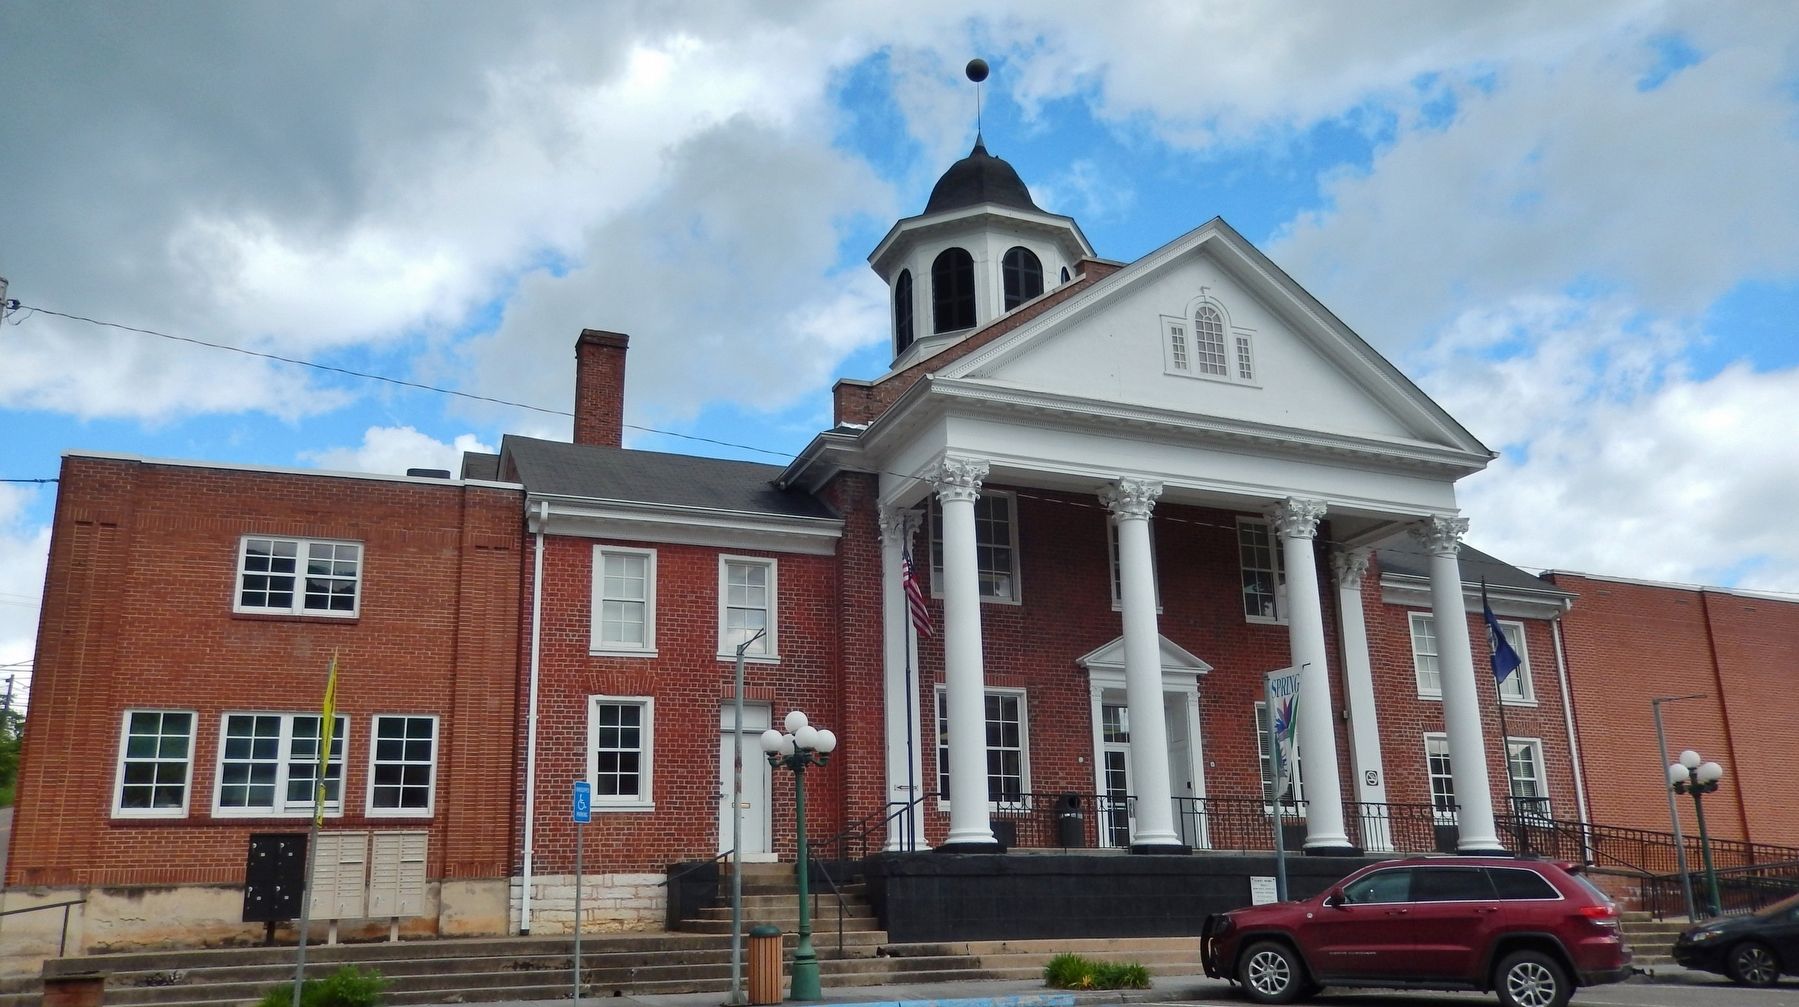 Scott County Courthouse, Gate City, Virginia image. Click for full size.